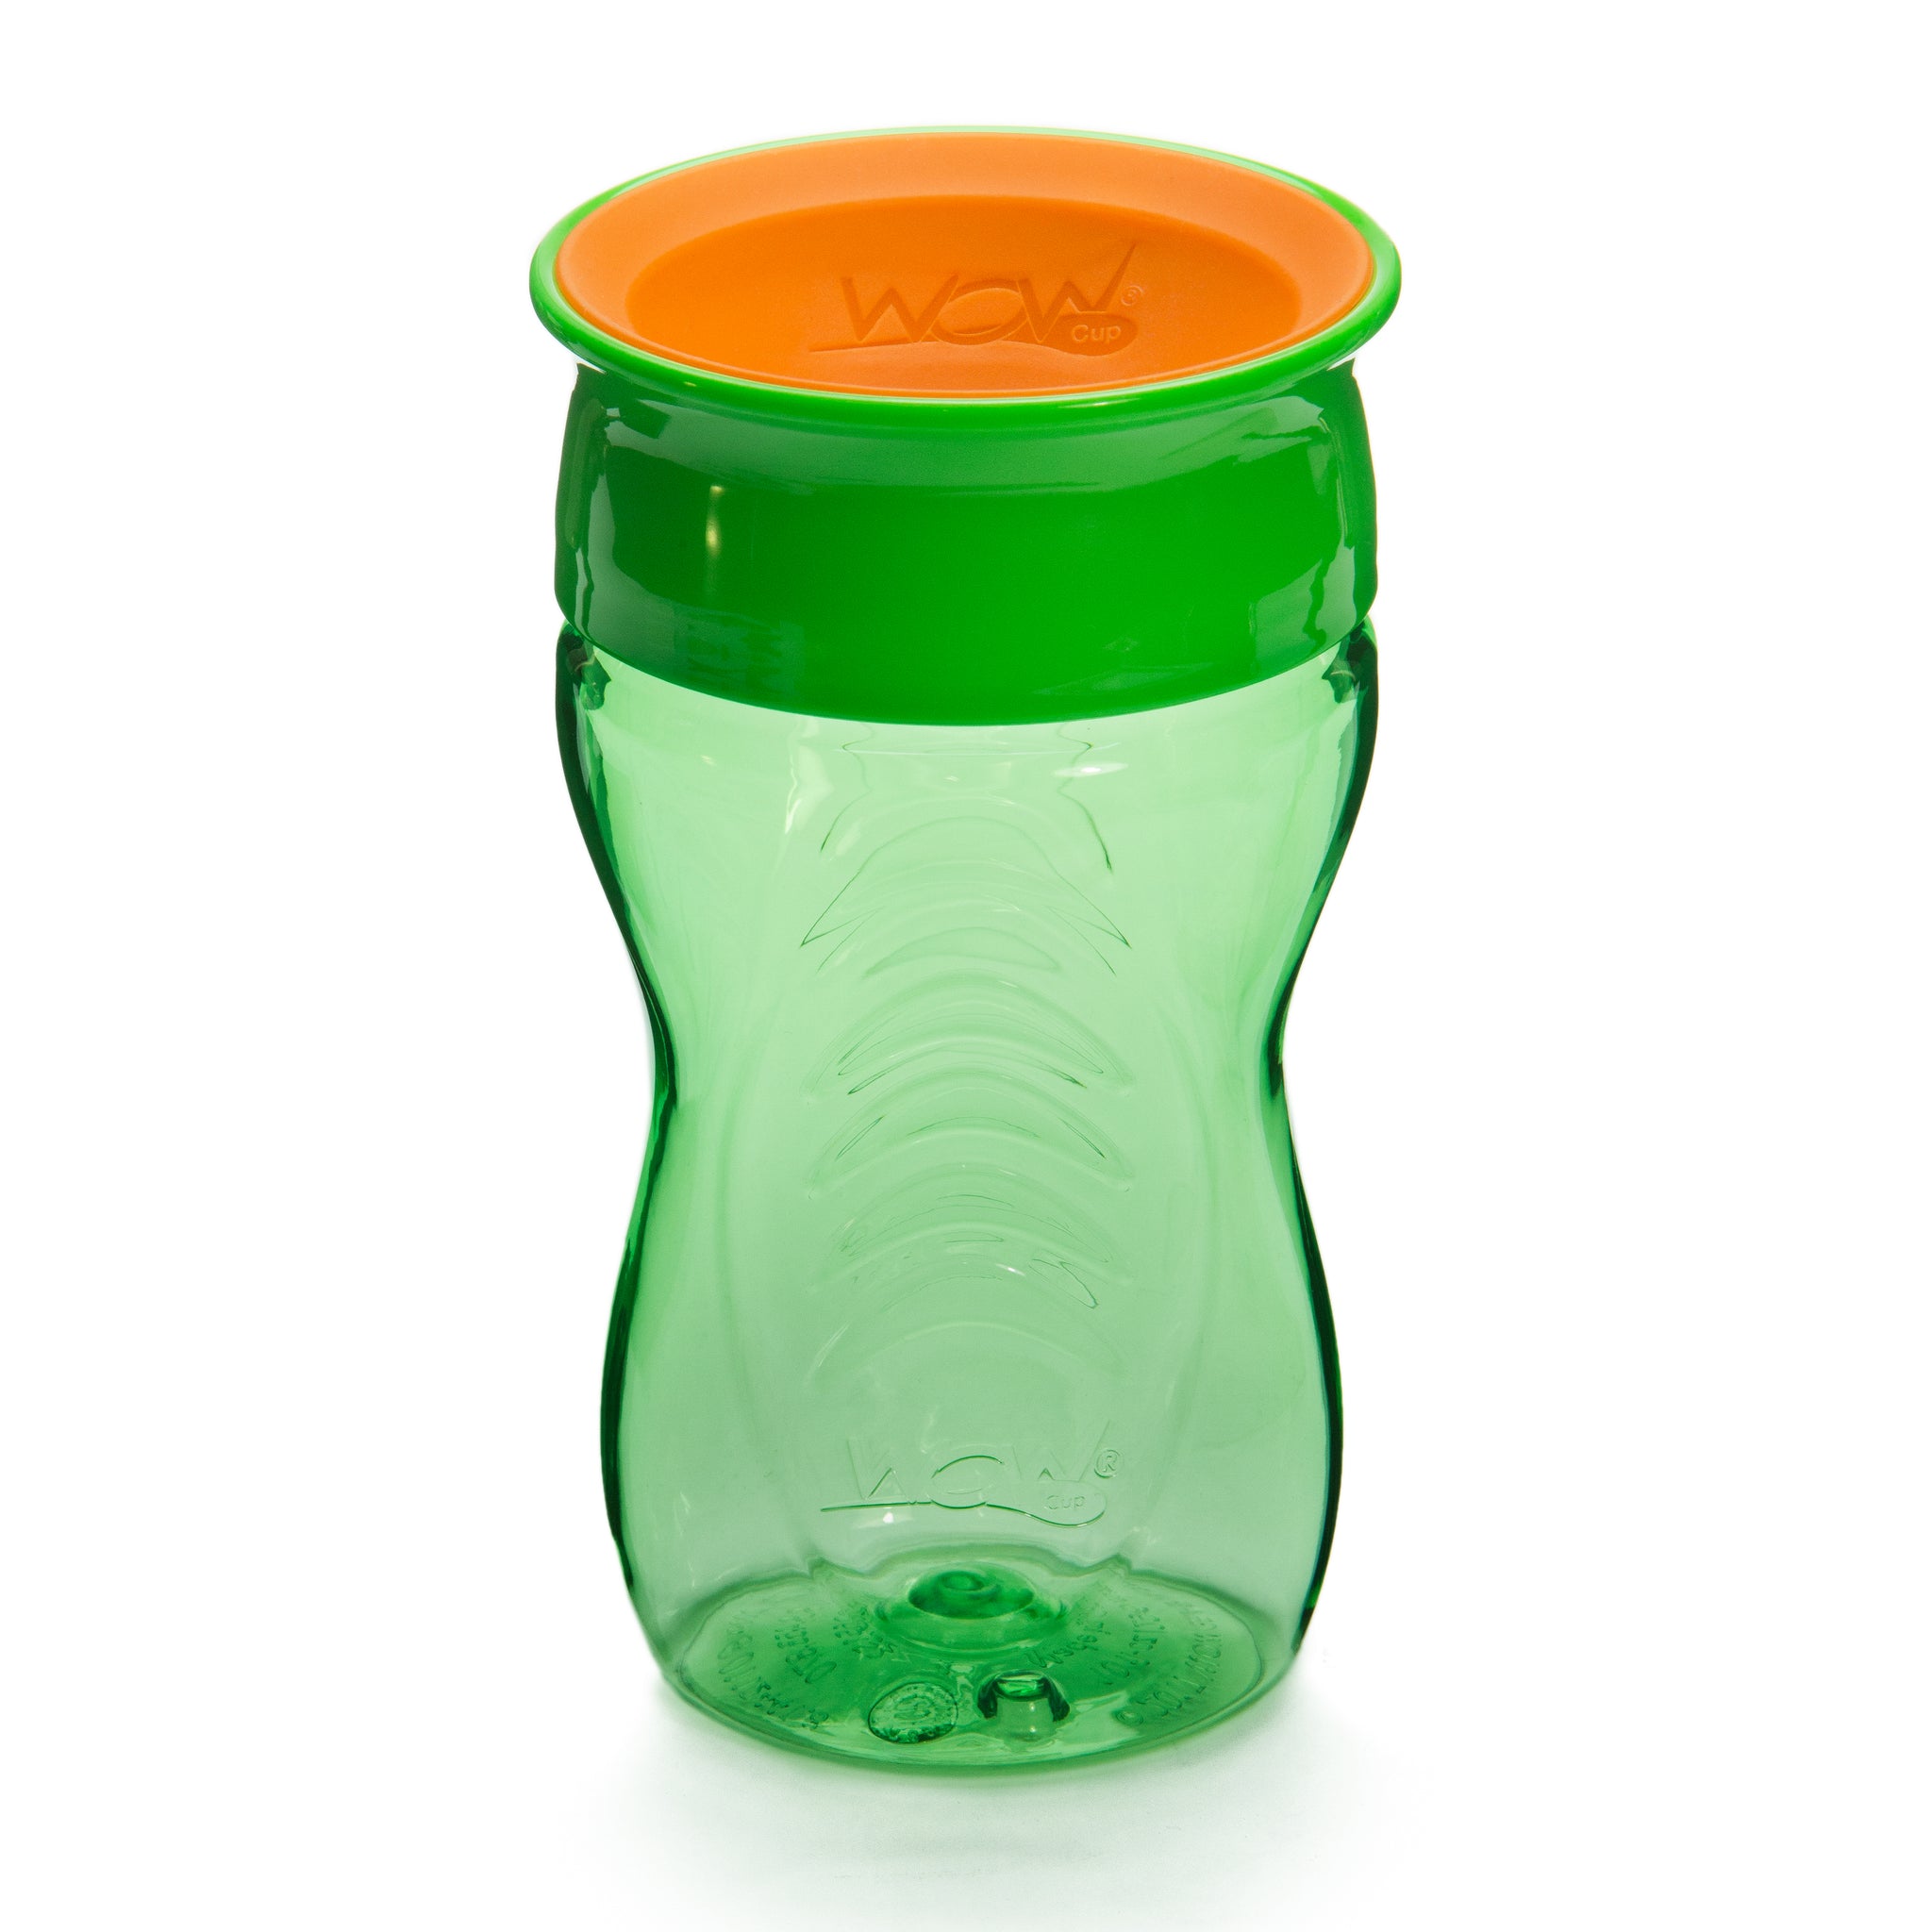 WOW CUP for Kids 360 Drinking Cup - Green, 10 oz. /296 ml - WOW GEAR